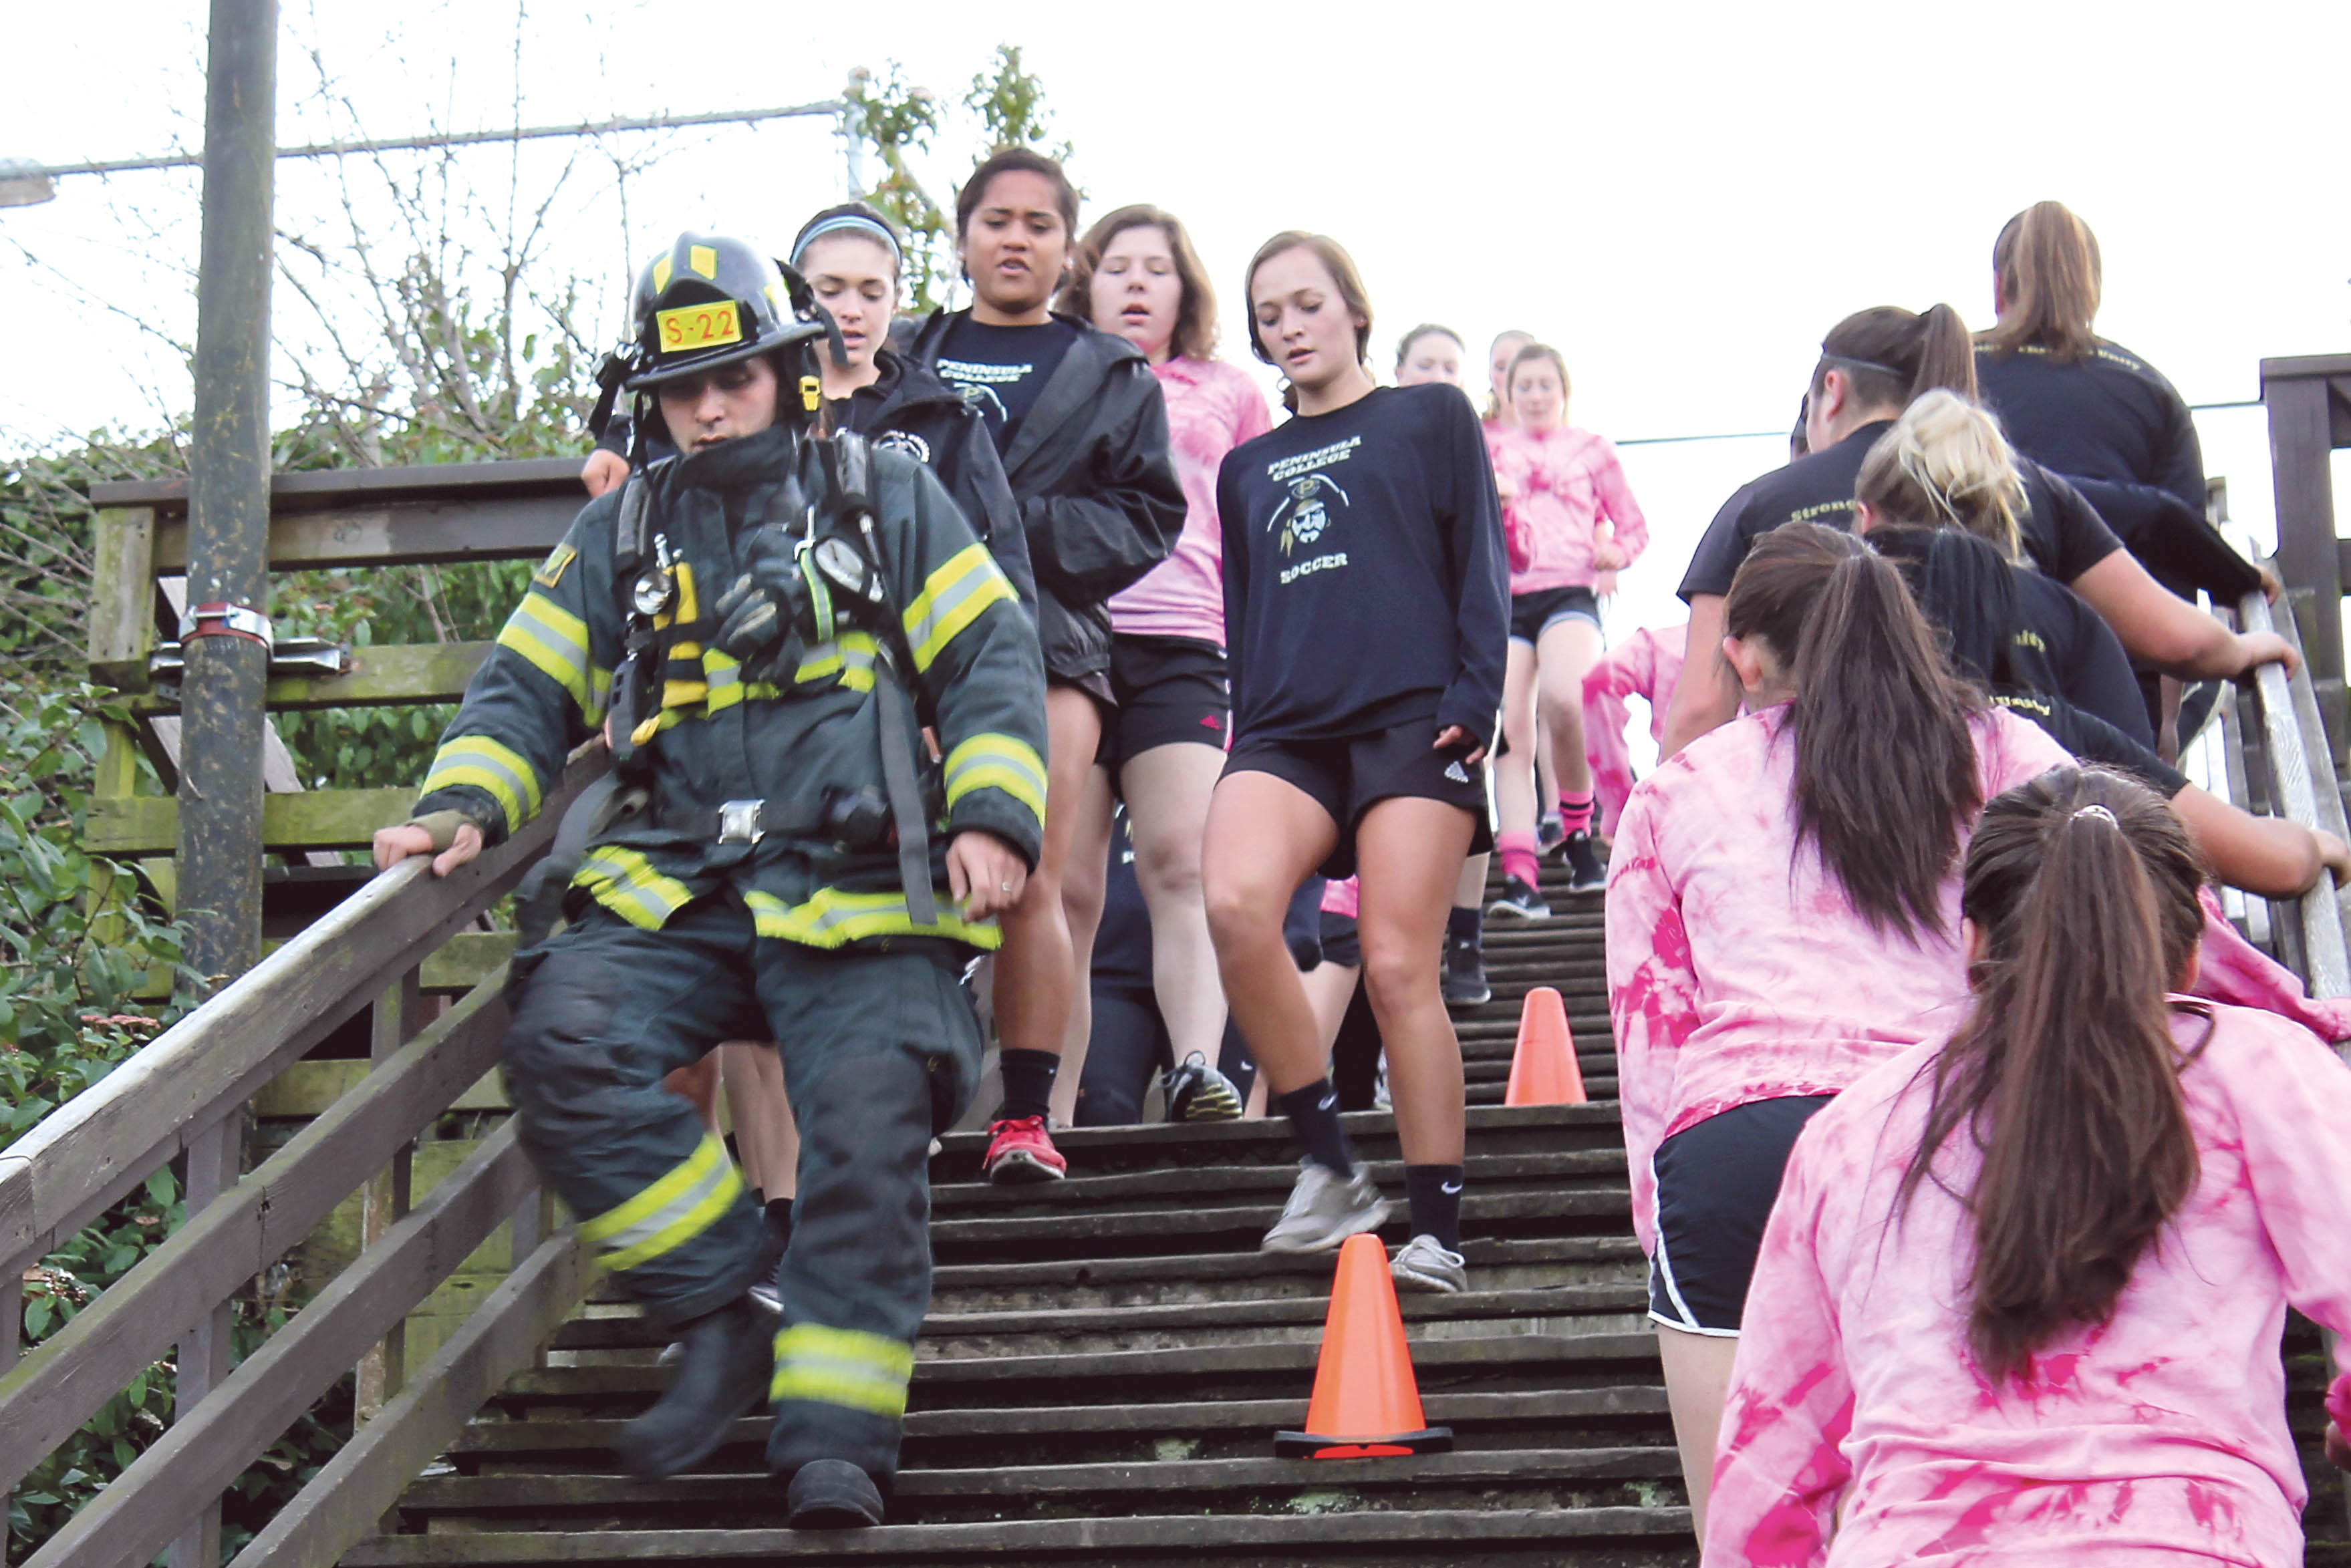 Area students work out with Port Angeles firefighters Feb. 16 at the staircase behind the Conrad Dyar Memorial Fountain at First and Laurel streets in Port Angeles. — Rob Edwards ()